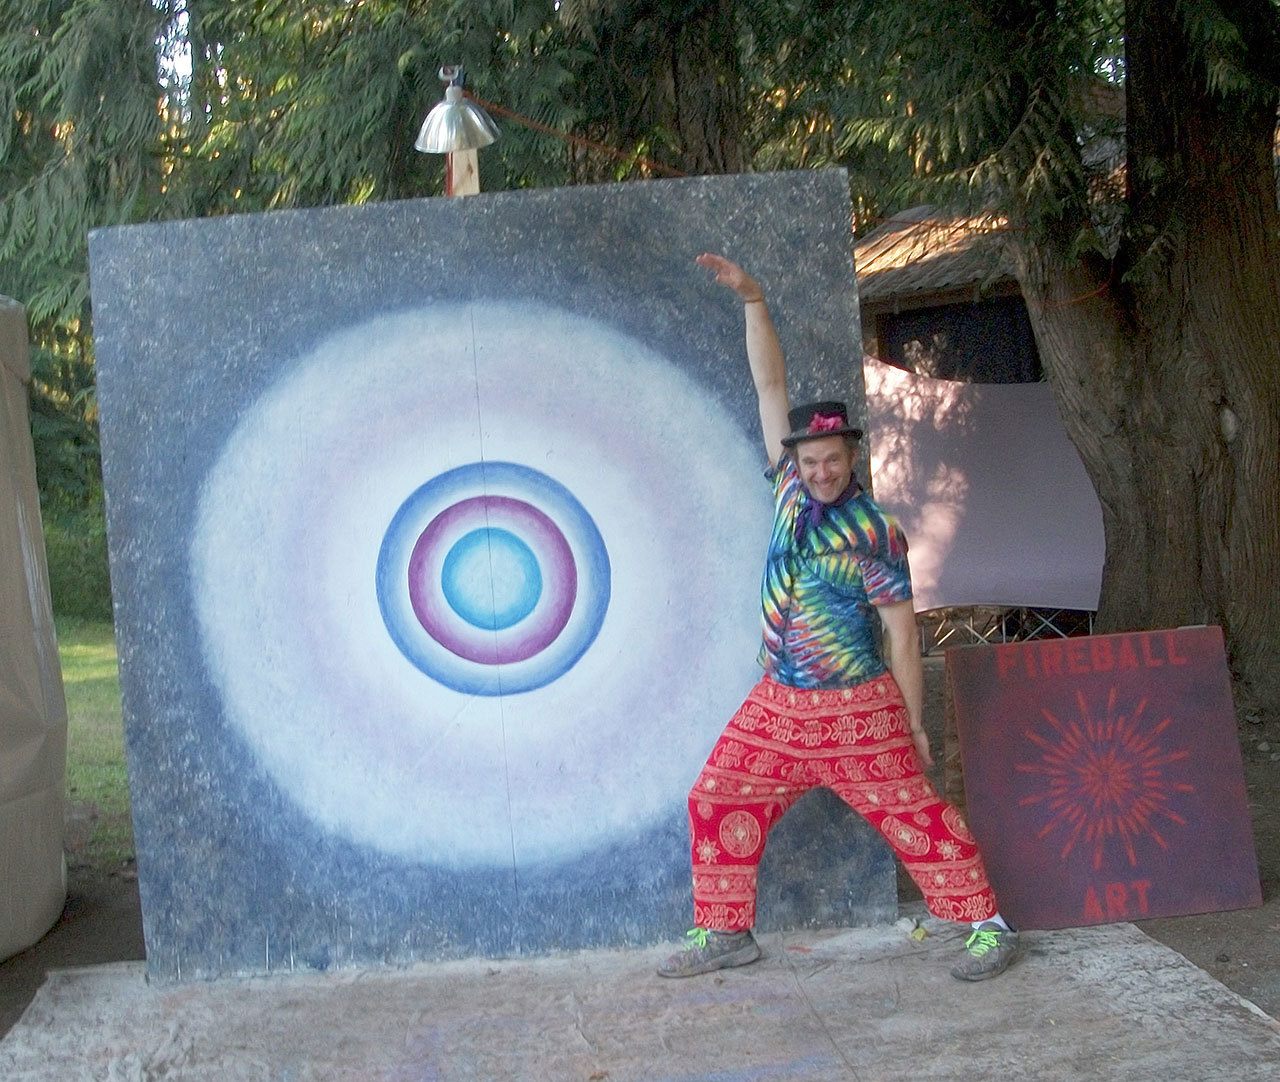 ”Fireball”​ ​Bill Ball​, 49, of Mukilteo, ​performance paints​ ​at Cascadia NW Festival in Granite Falls.​ This week he is at Burning Man.​ (Photo by Michelle Dietz)